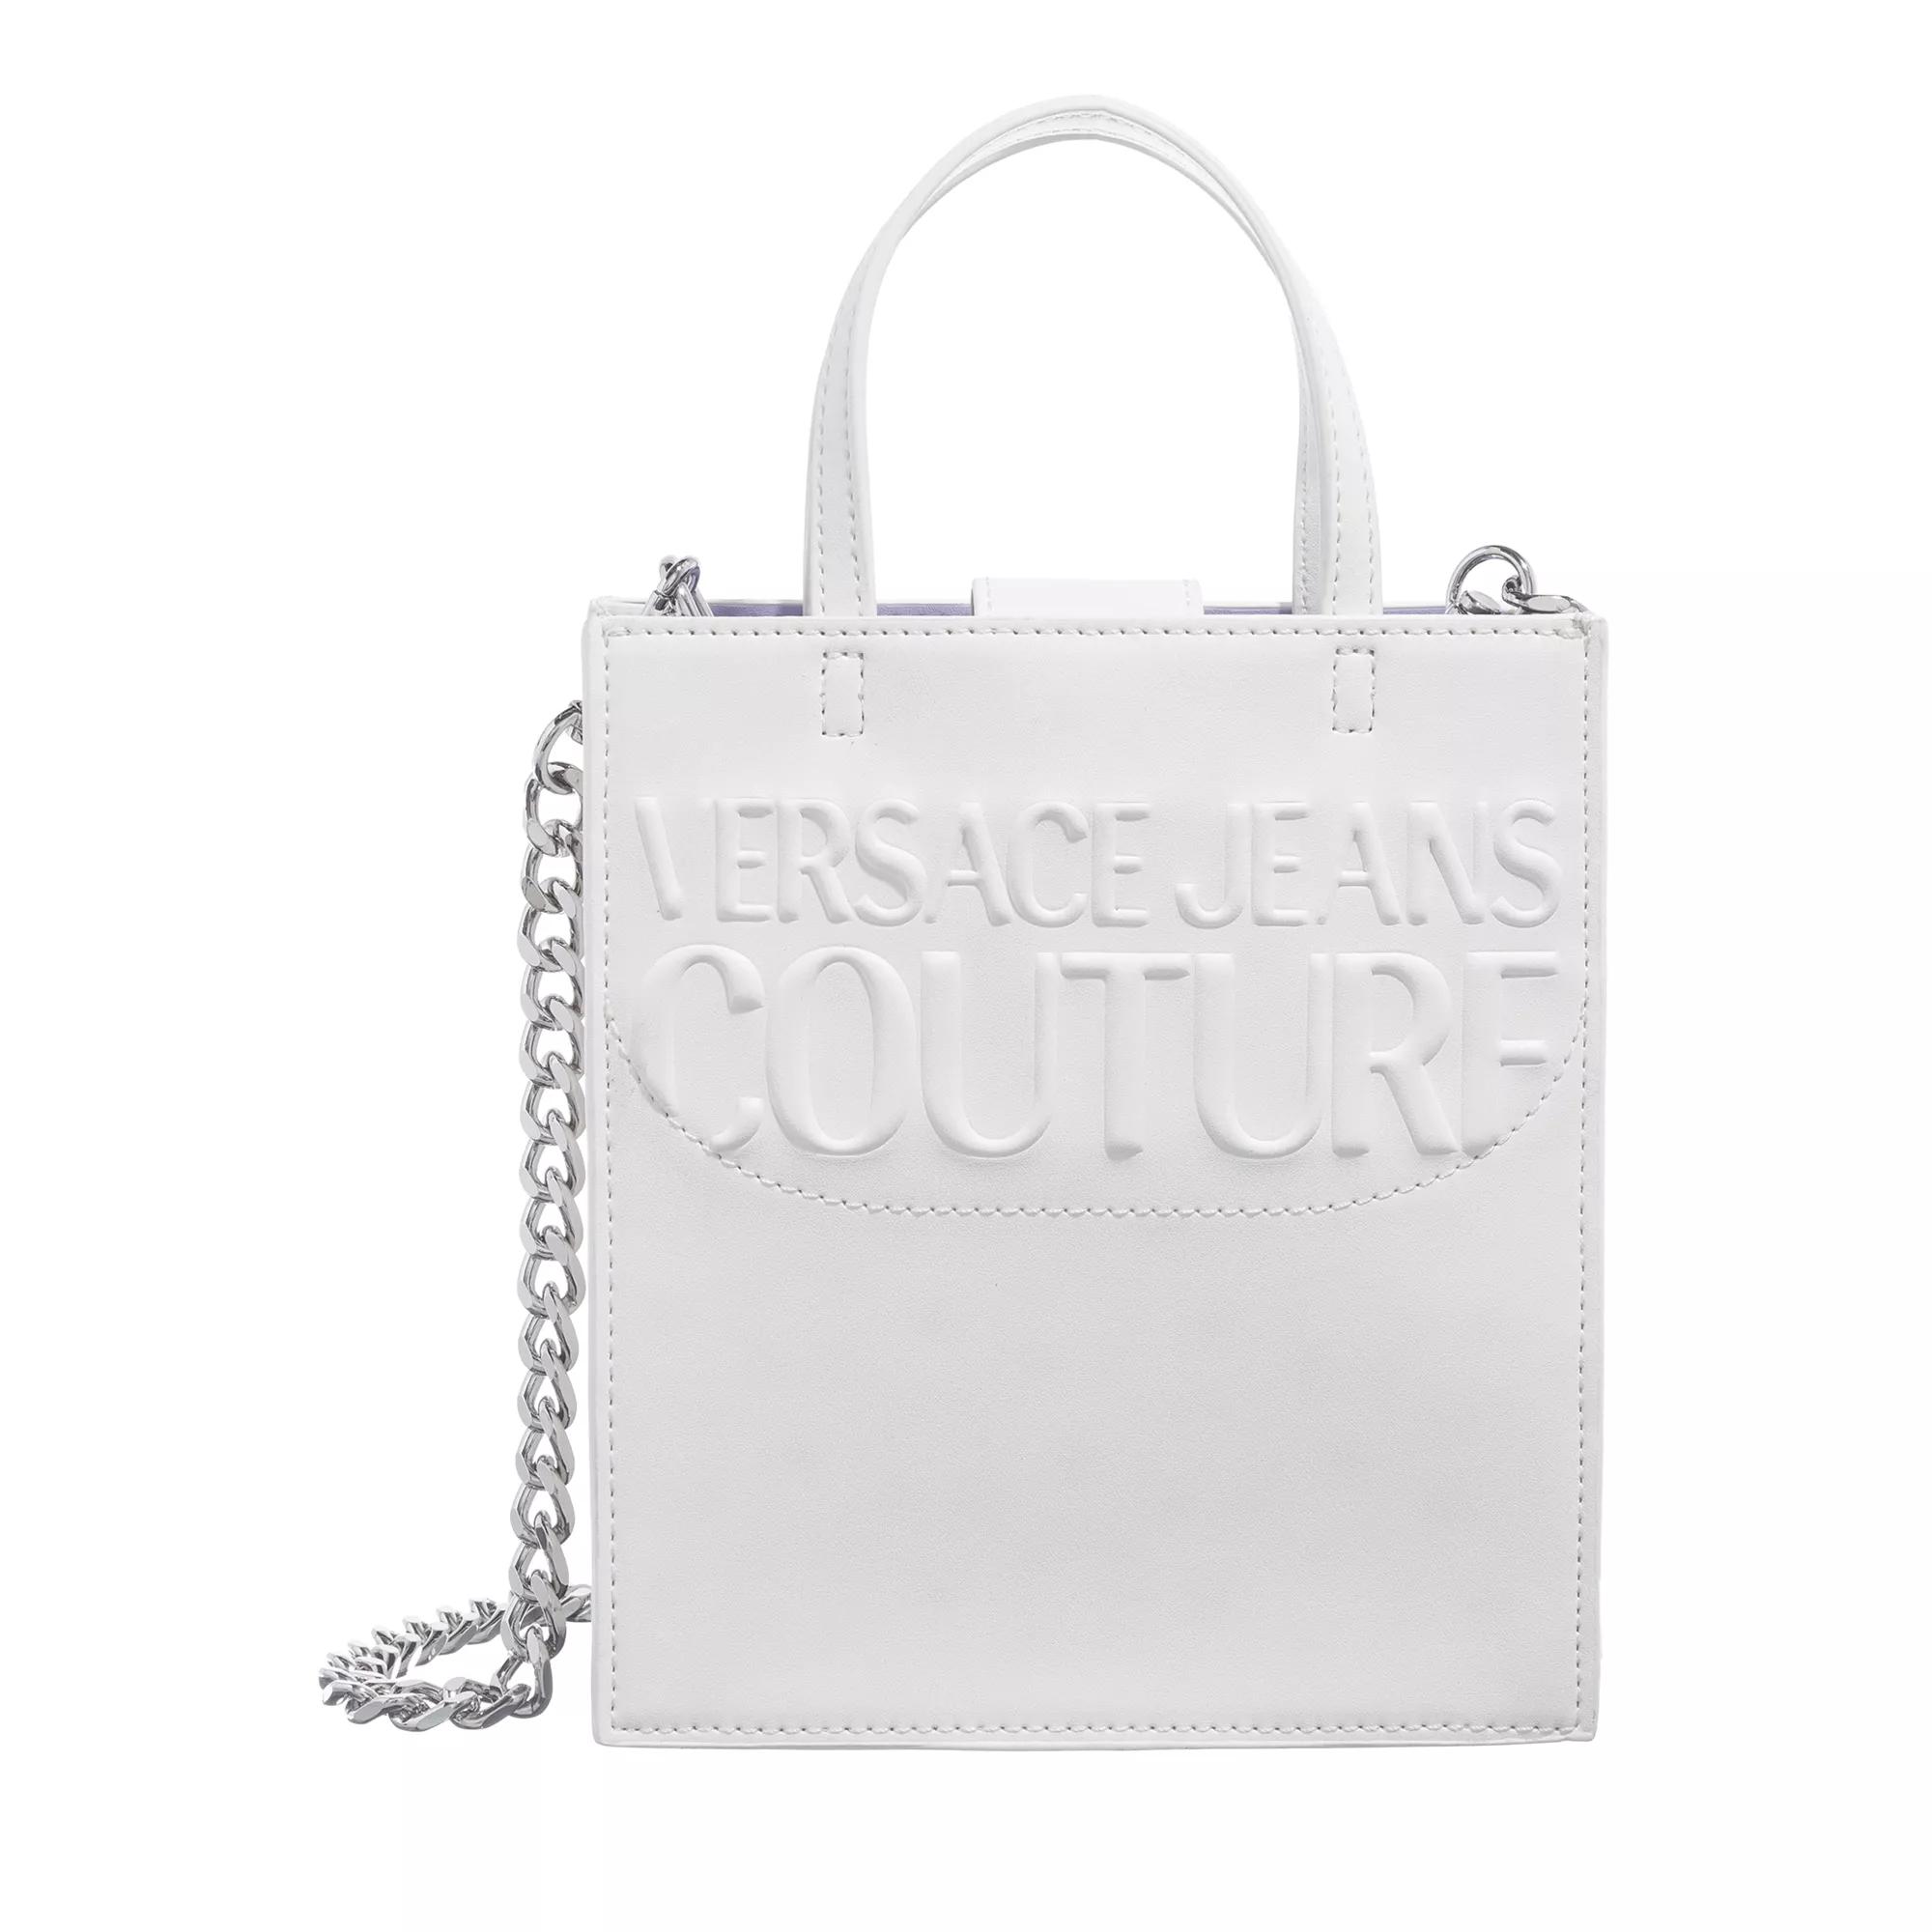 Versace Jeans Couture Institutional Logo White | Crossbody Bag